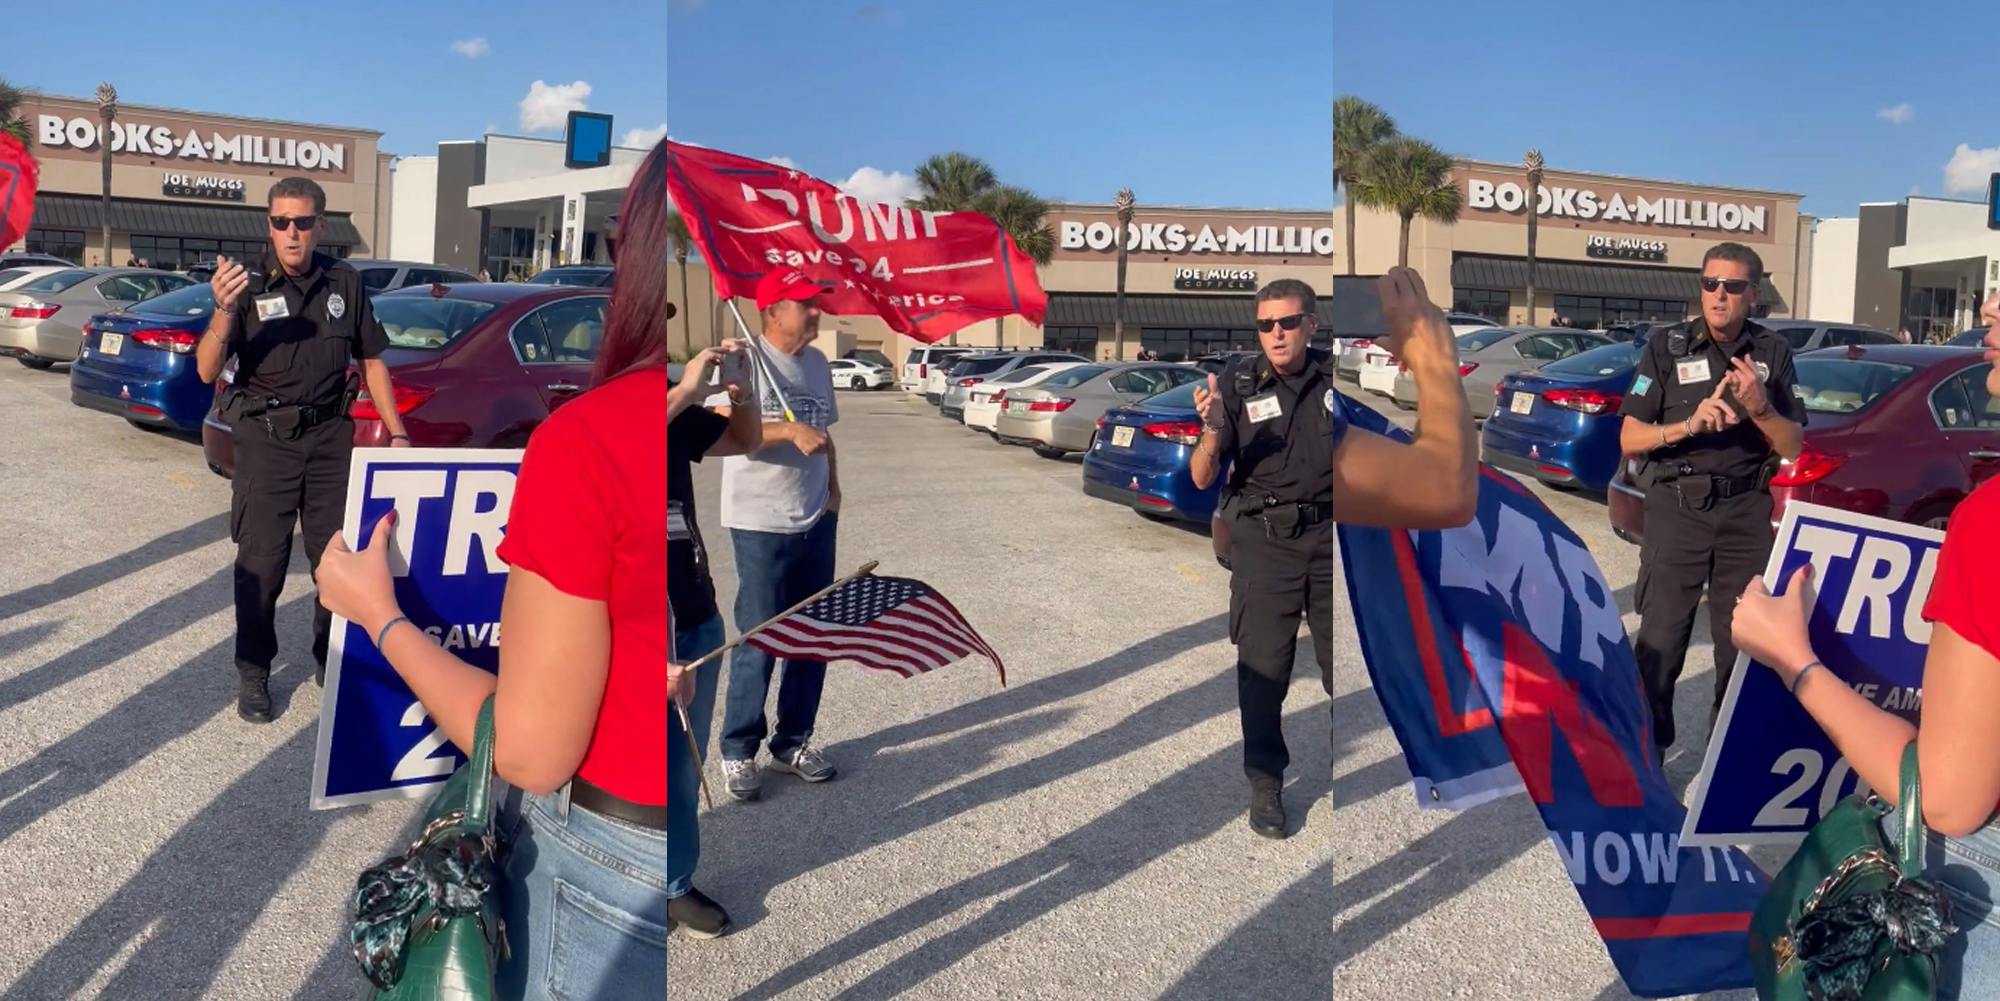 Policeman speaking to Trump supporters outside (l) Policeman speaking to Trump supporters outside (c) Policeman speaking to Trump supporters outside (r)